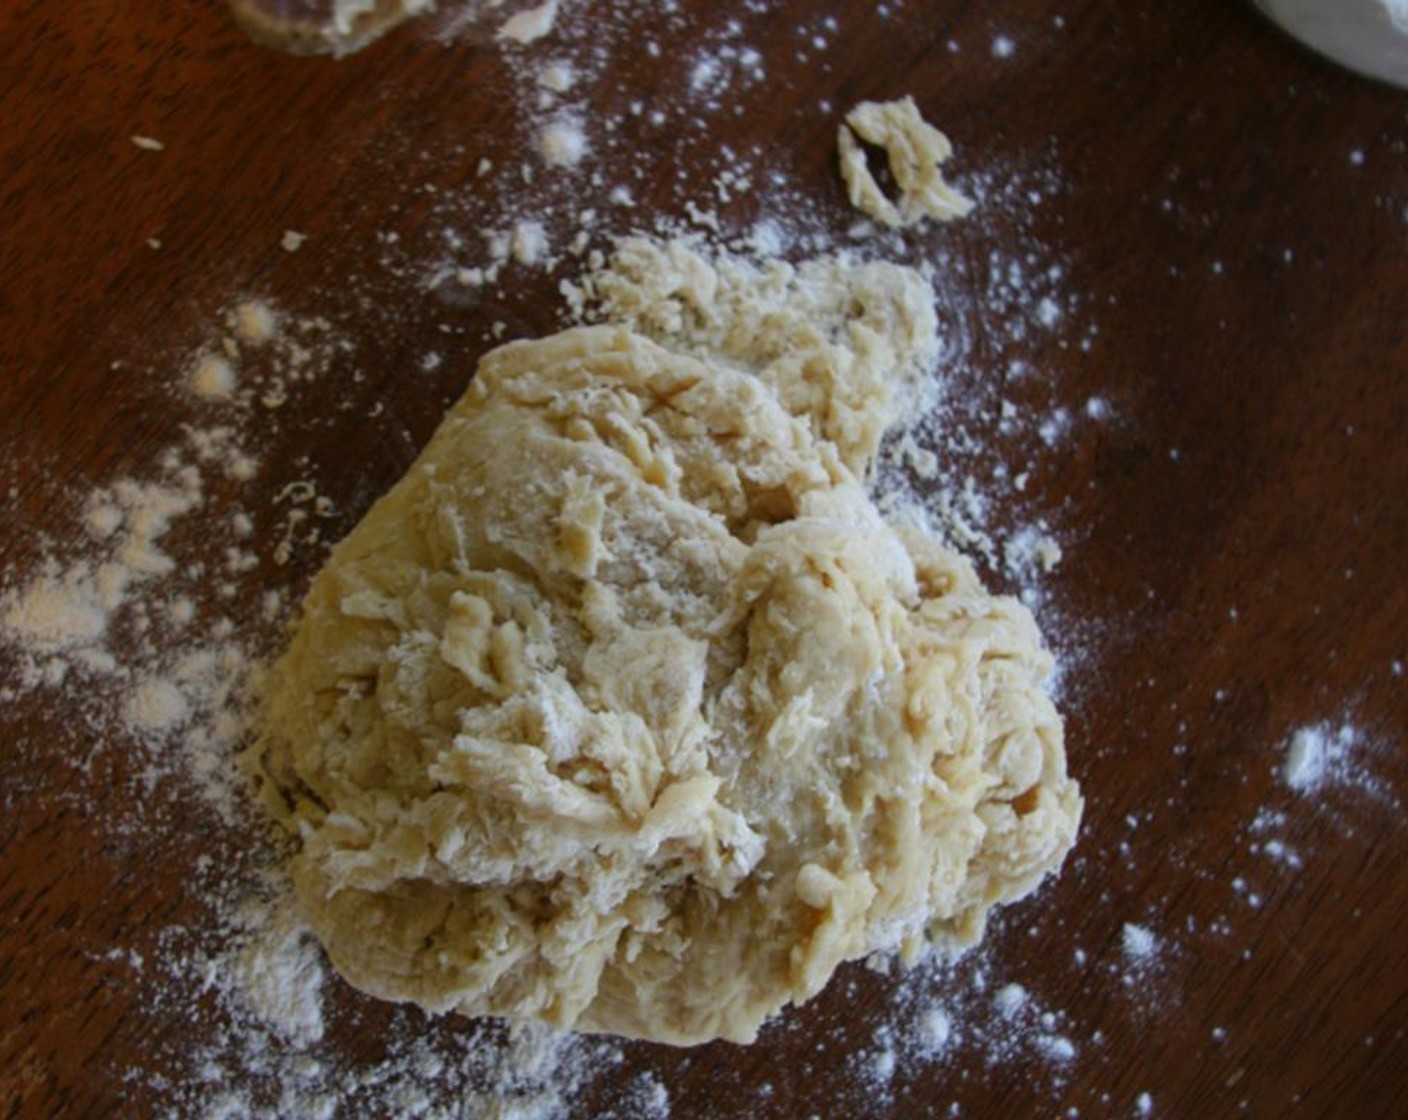 step 4 Continue to add the remaining Unbleached All Purpose Flour (1 3/4 cups) a little at a time until a dough forms.